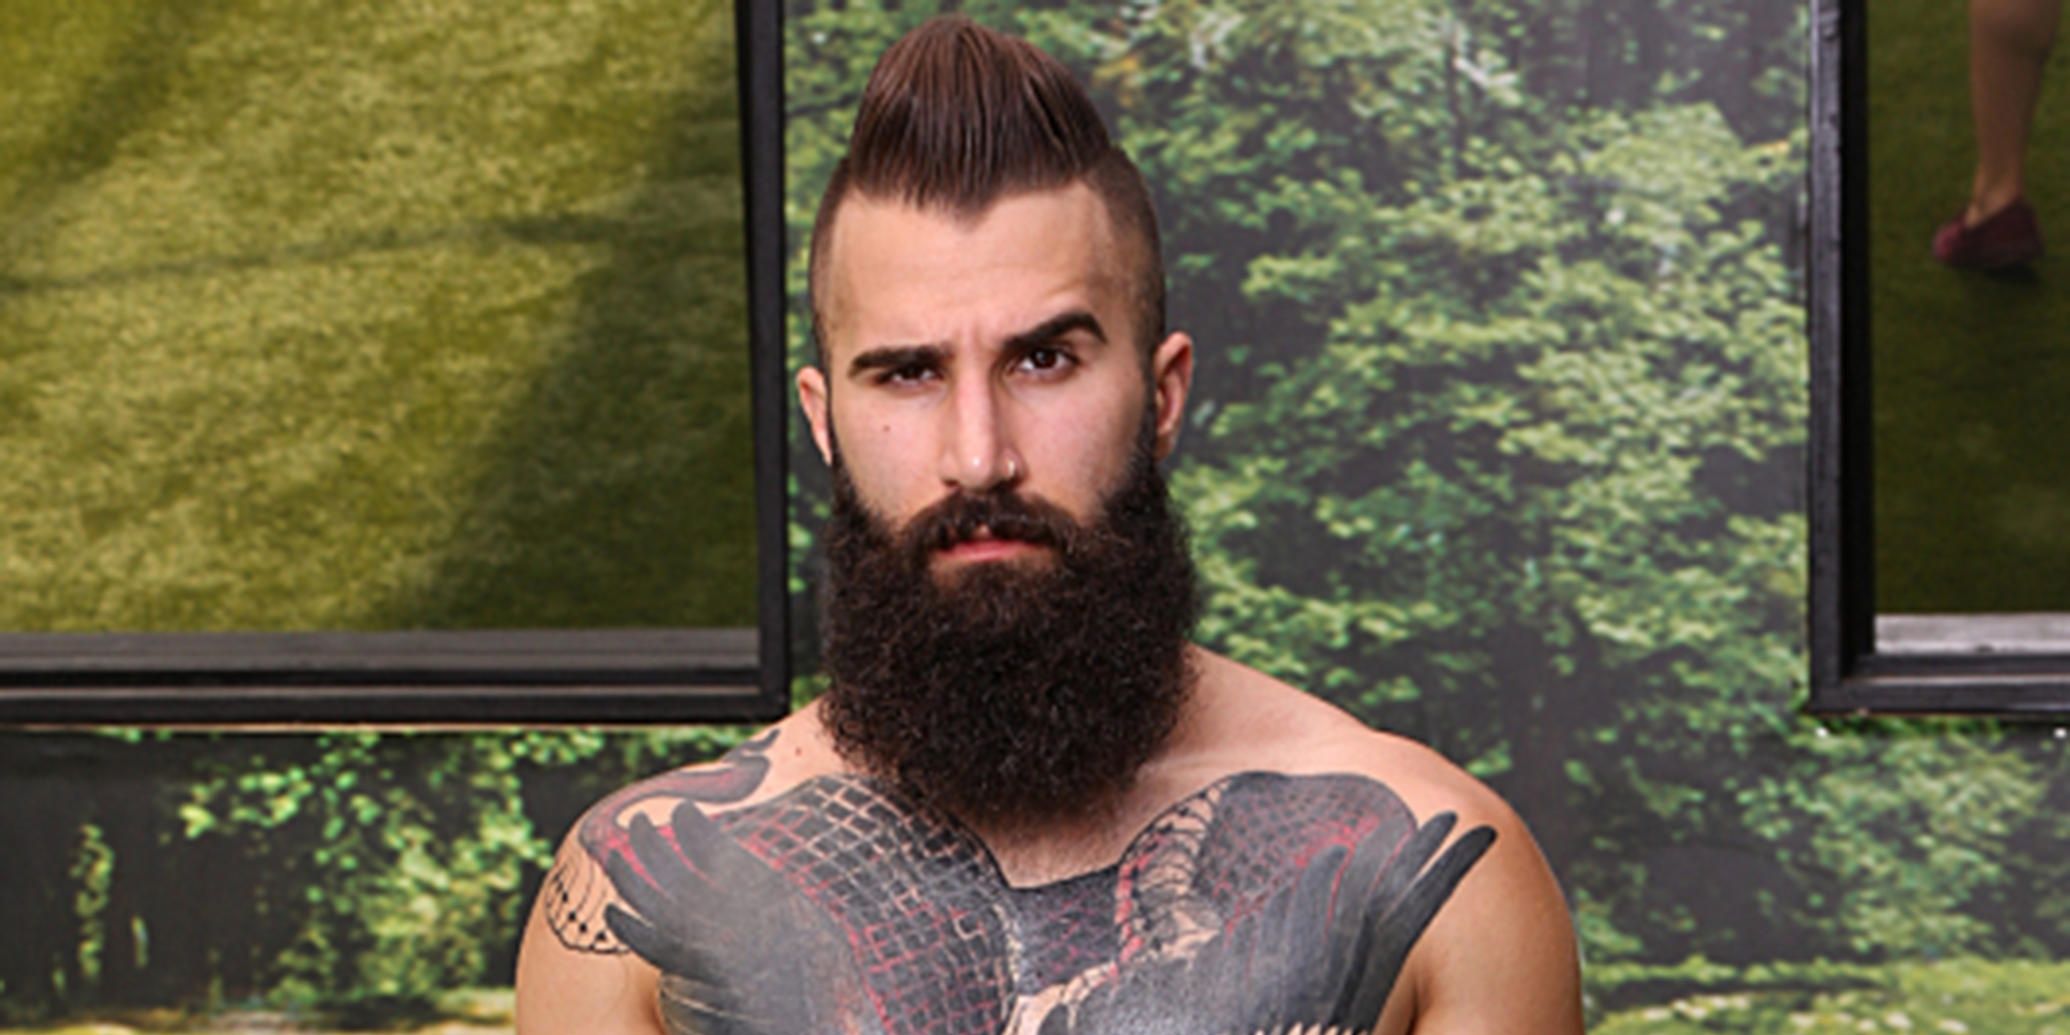 Paul Abrahamian poses with a cocked eyebrown in a Big Brother 18 promo image